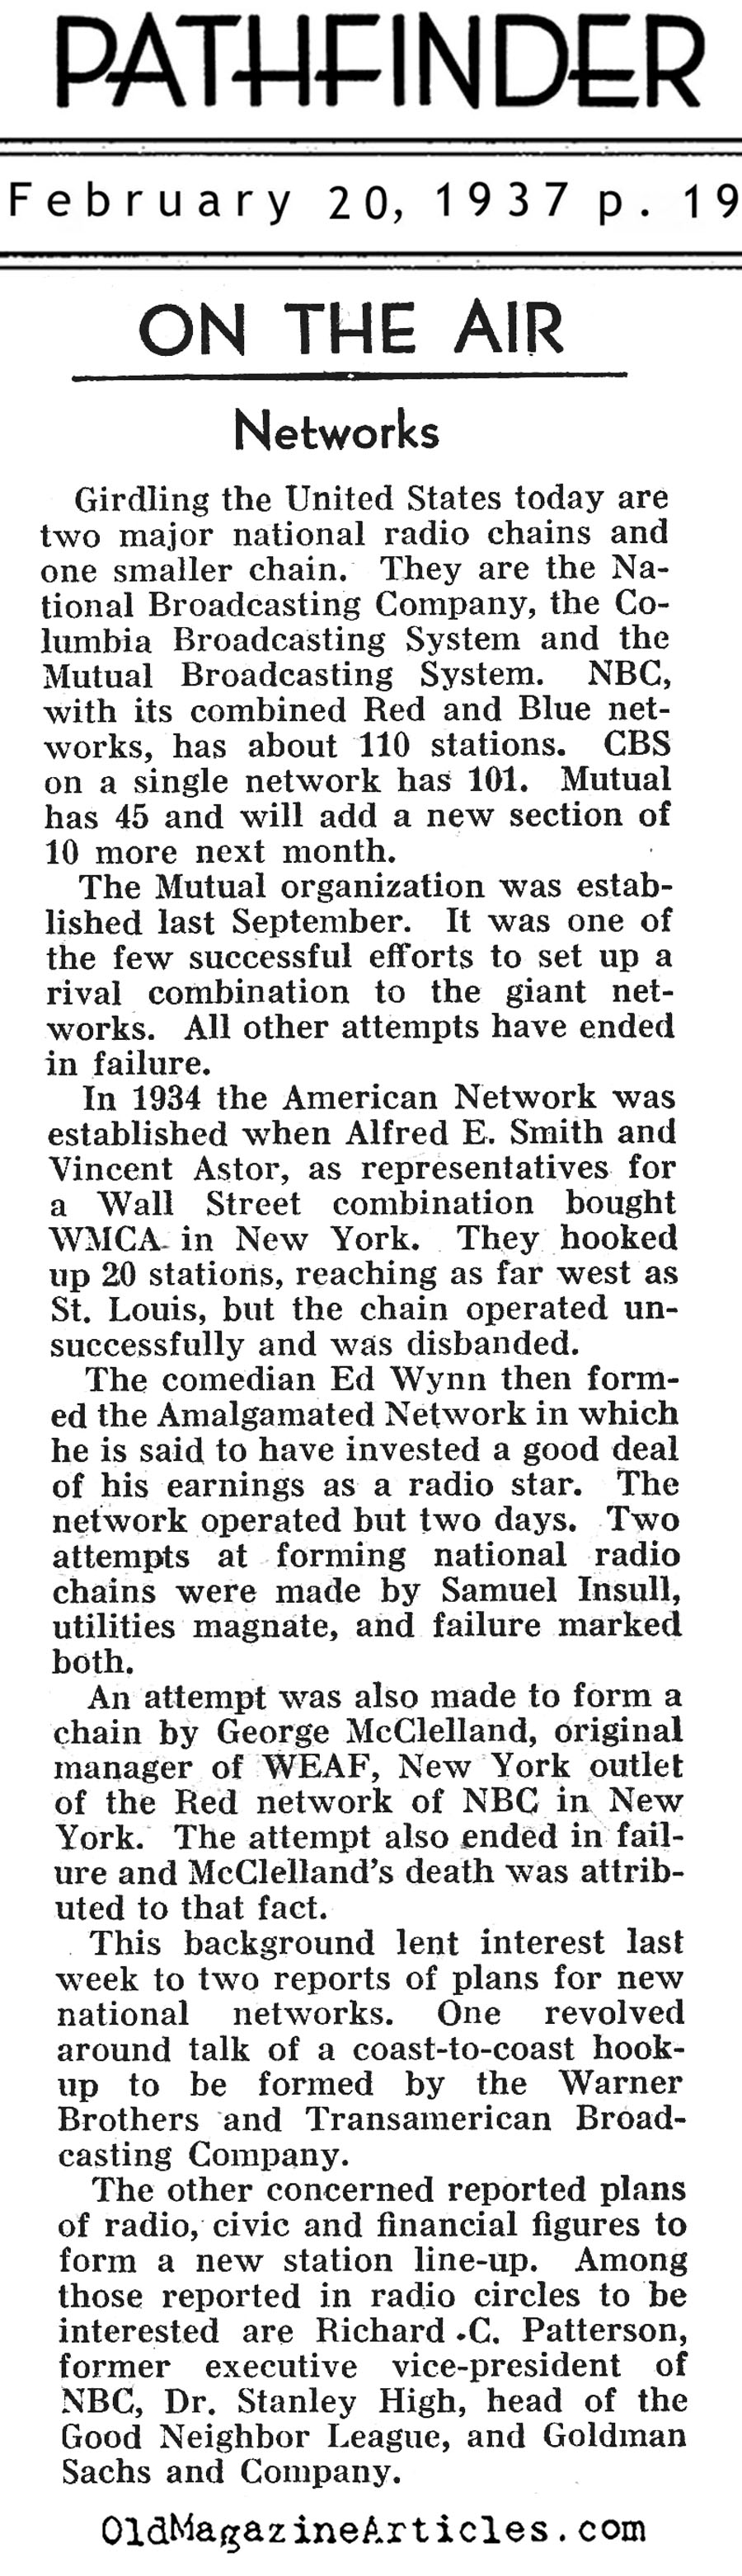 The State of Radio In 1937 America<BR> (Pathfinder Magazine, 1937)